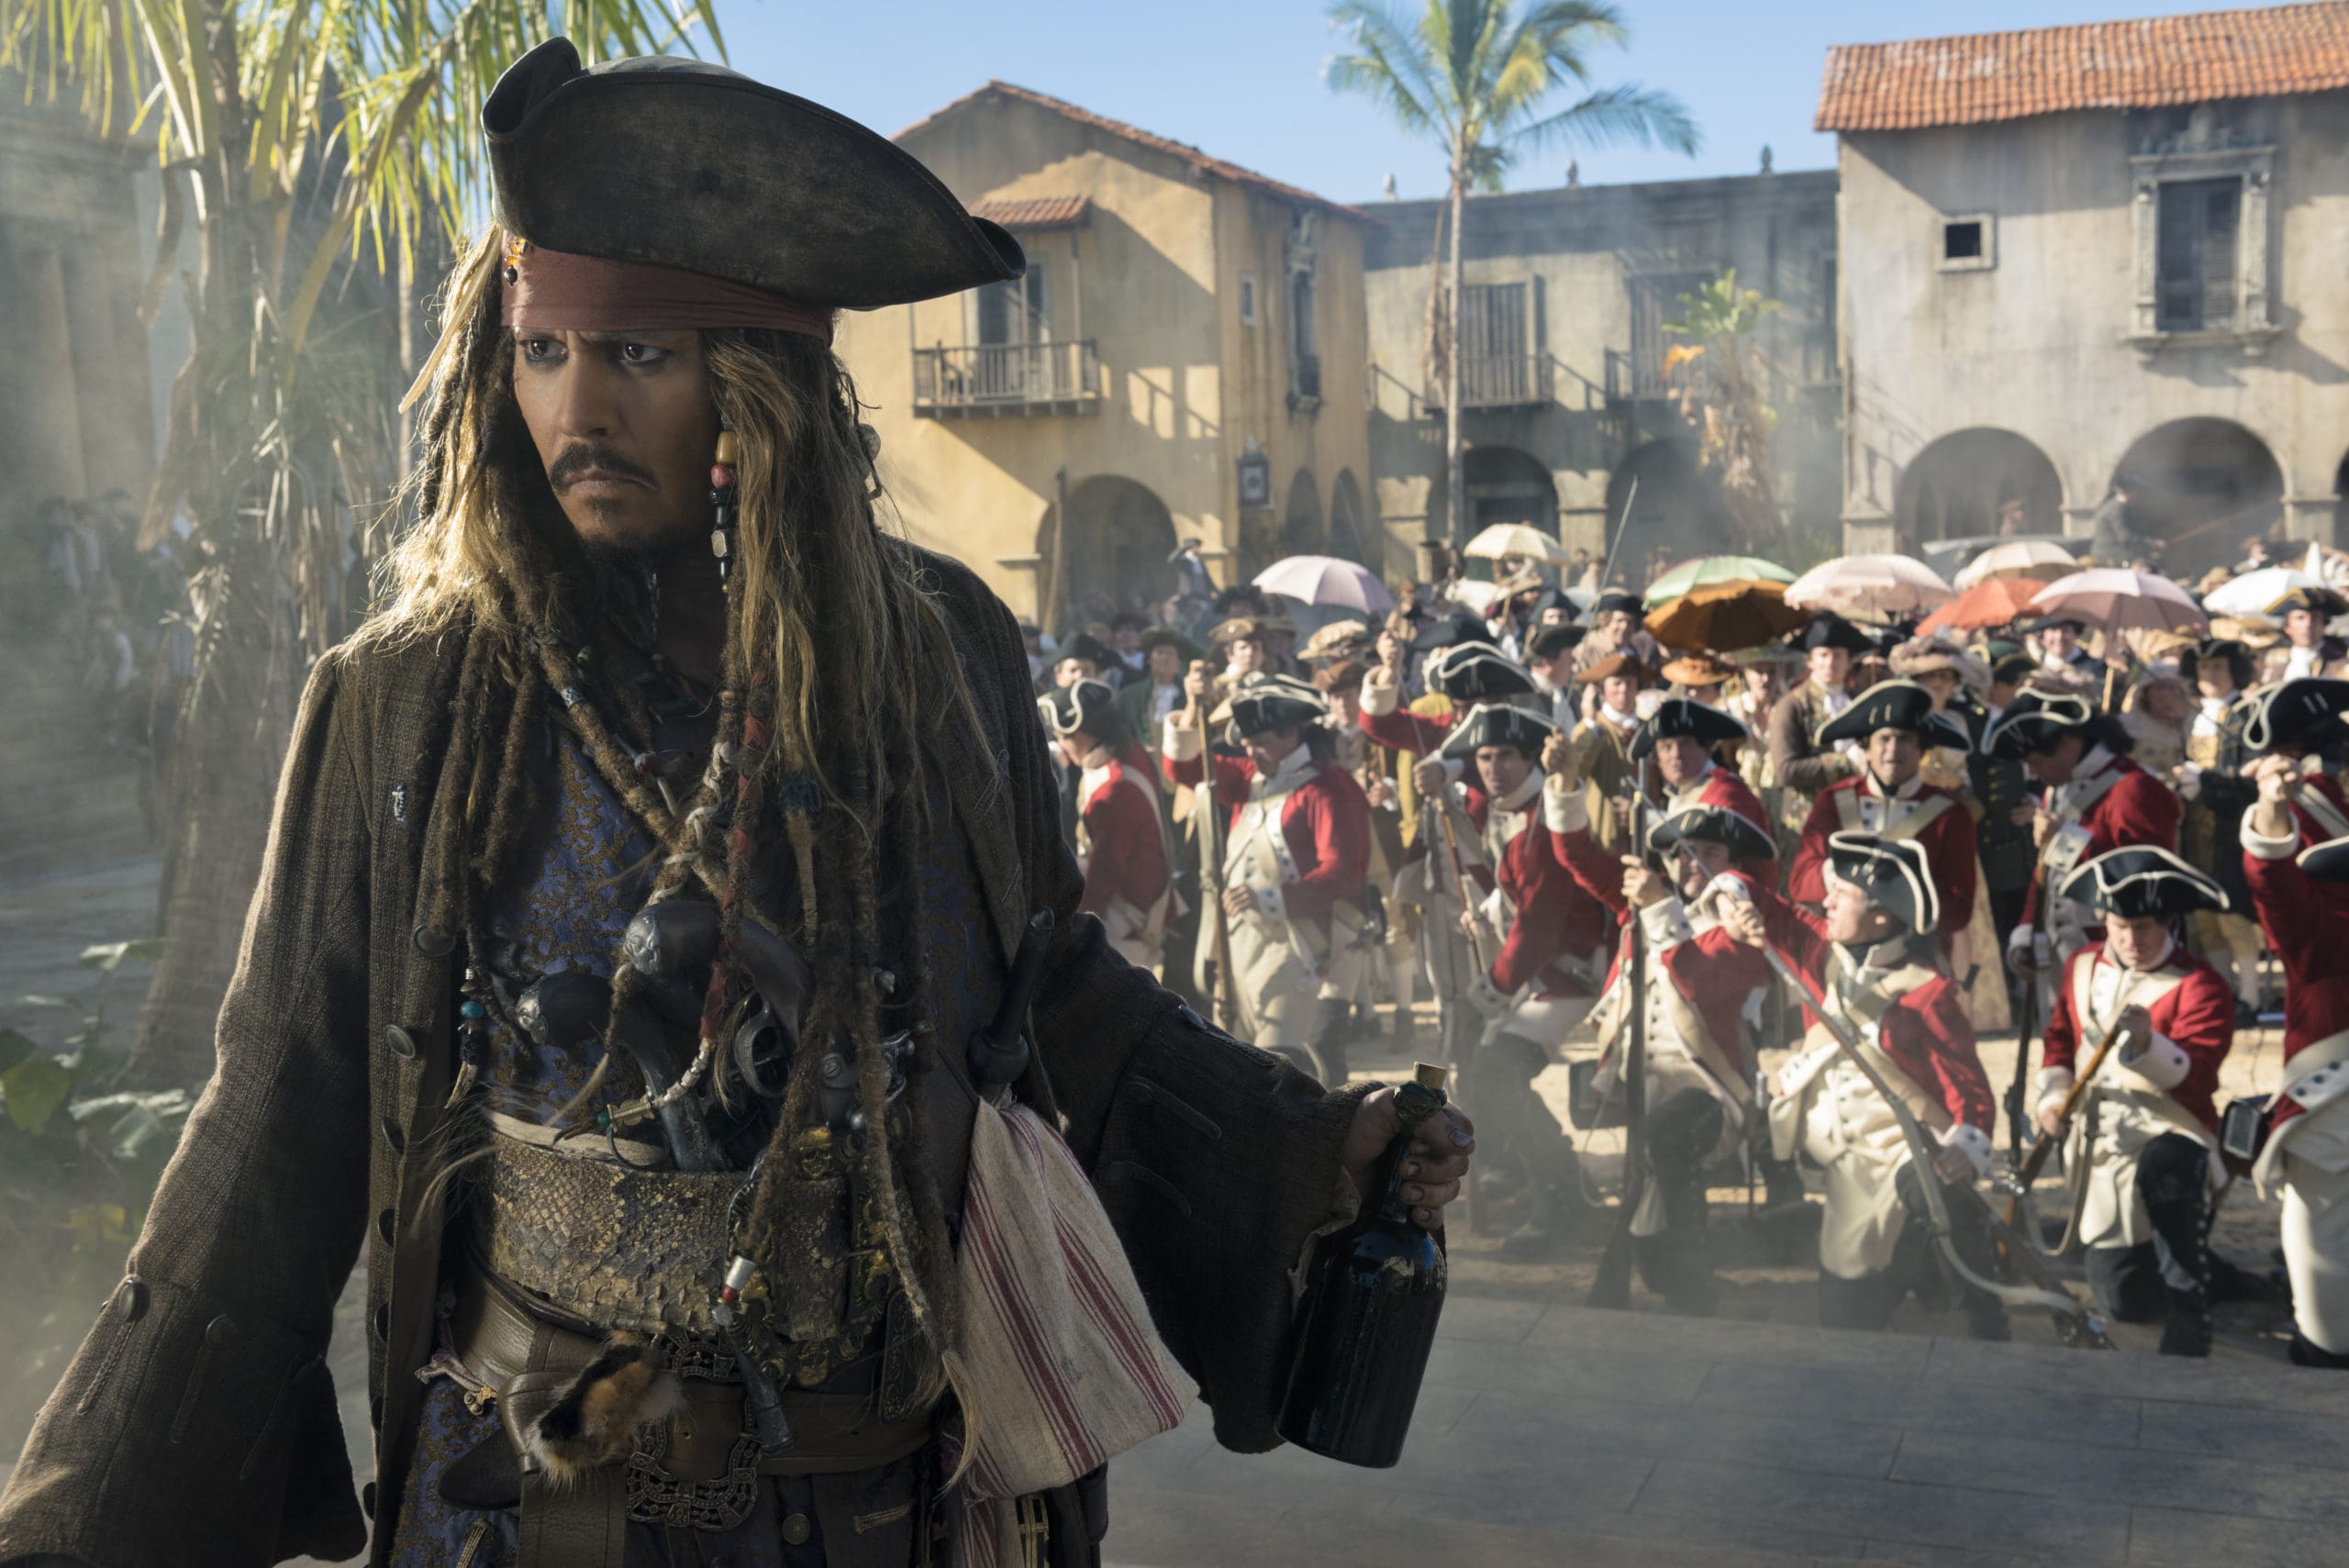 "PIRATES OF THE CARIBBEAN: DEAD MEN TELL NO TALES"..The villainous Captain Salazar (Javier Bardem) pursues Jack Sparrow (Johnny Depp) as he searches for the trident used by Poseidon..Pictured: Johnny Depp (Captain Jack Sparrow)..Ph: Peter Mountain..© Disney Enterprises, Inc. All Rights Reserved.